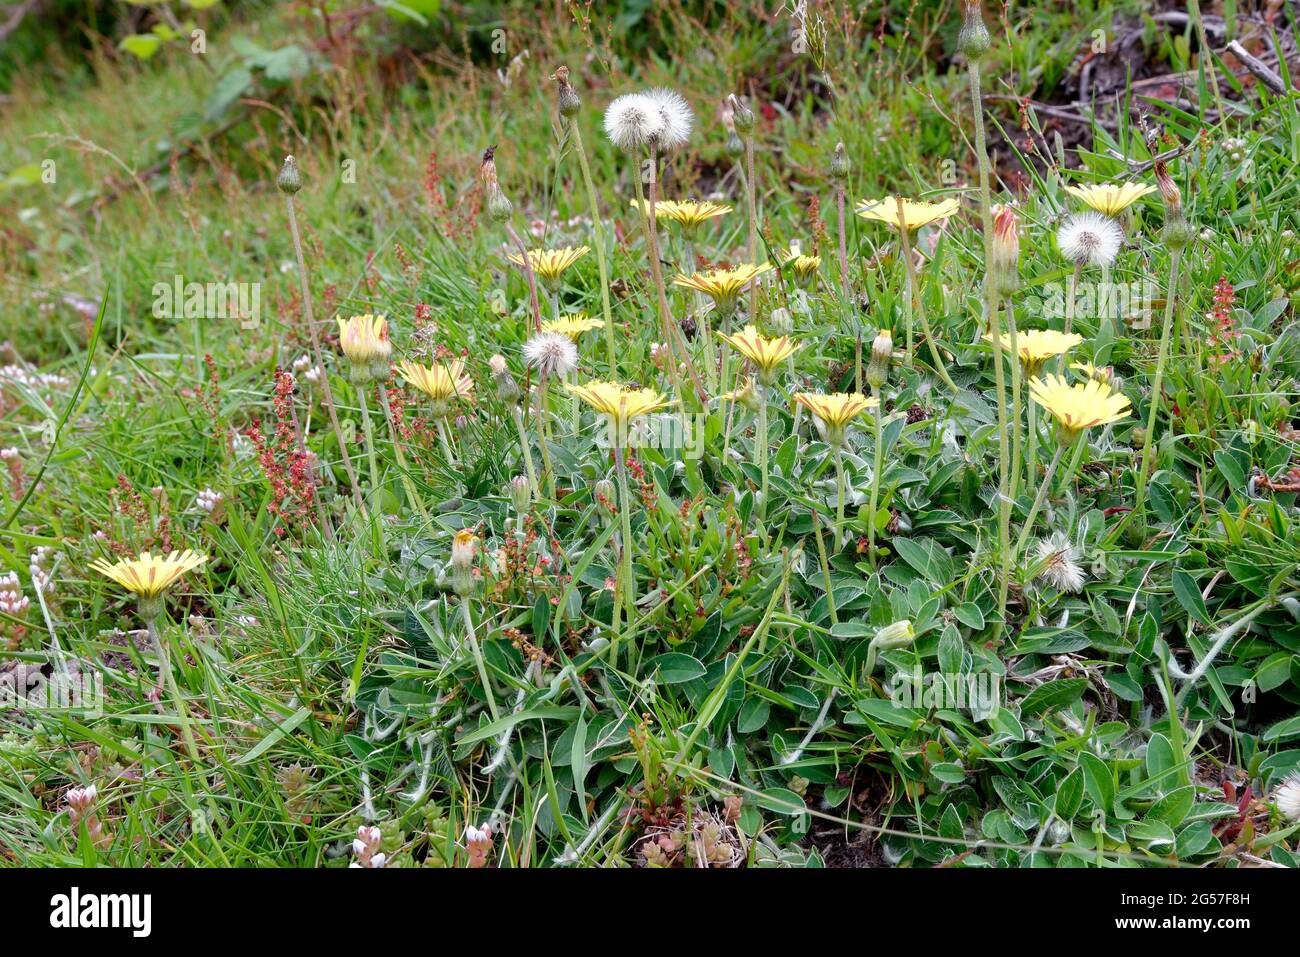 Mouse-ear Hawkweed - Pilosella officinarum growing with Sheep's Sorrel & English Stonecrop Stock Photo